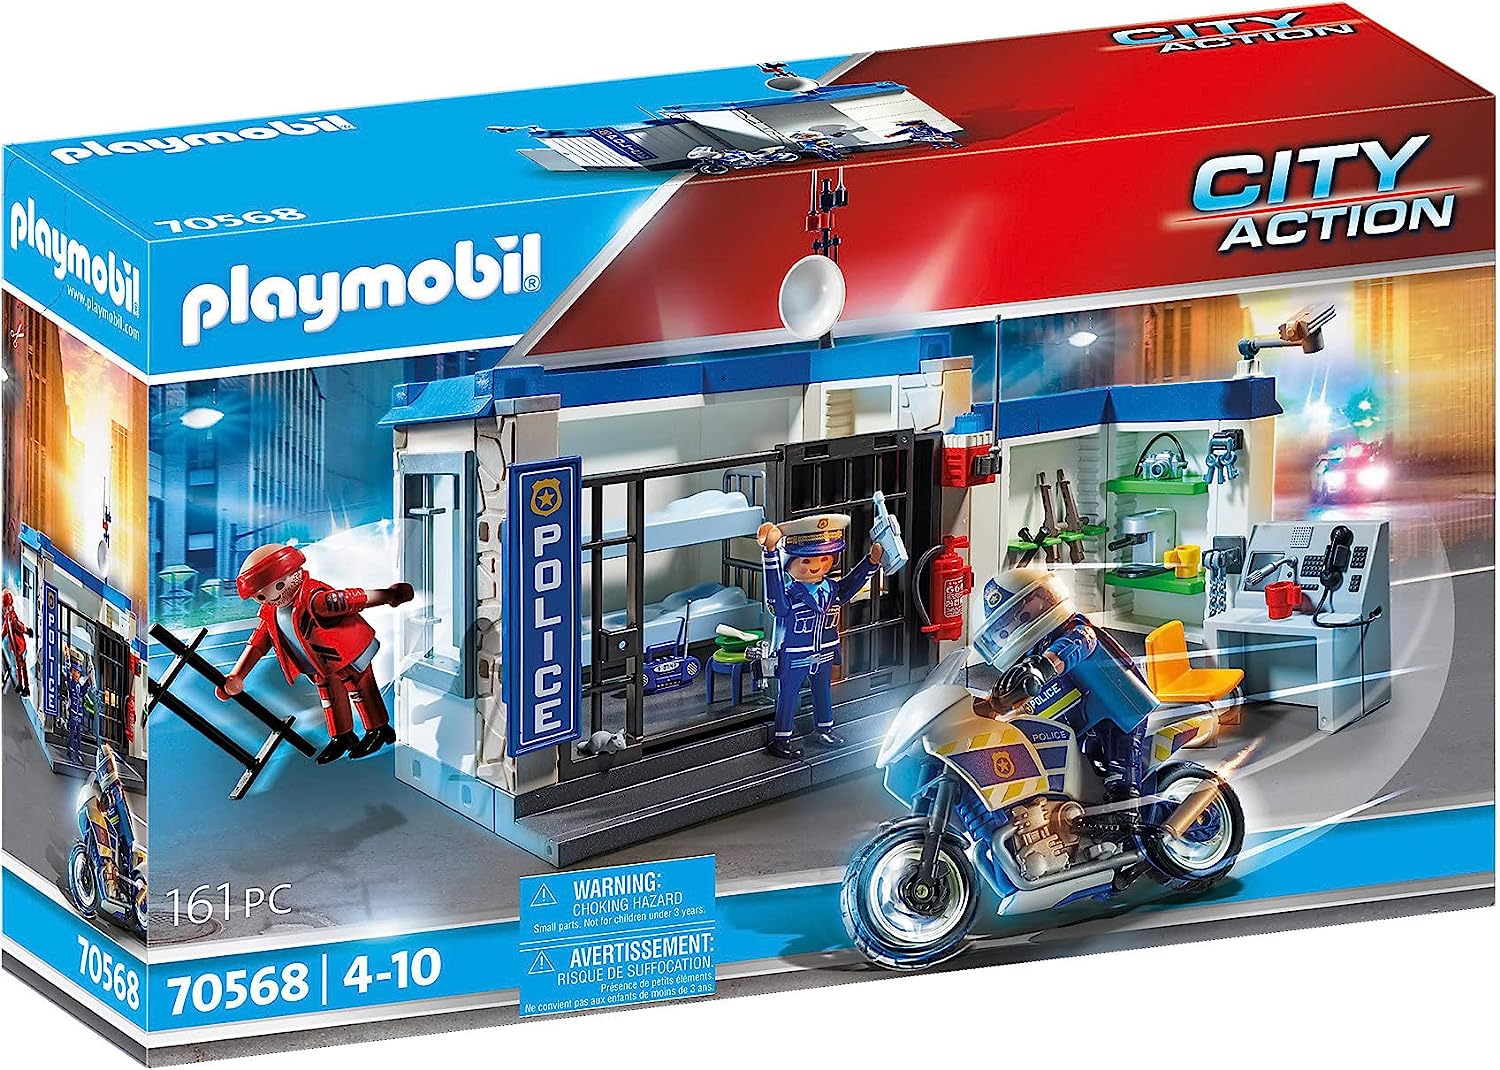 Playmobil City Action 70568 Police: Escape from Prison for Children Aged 4 - 10 Years